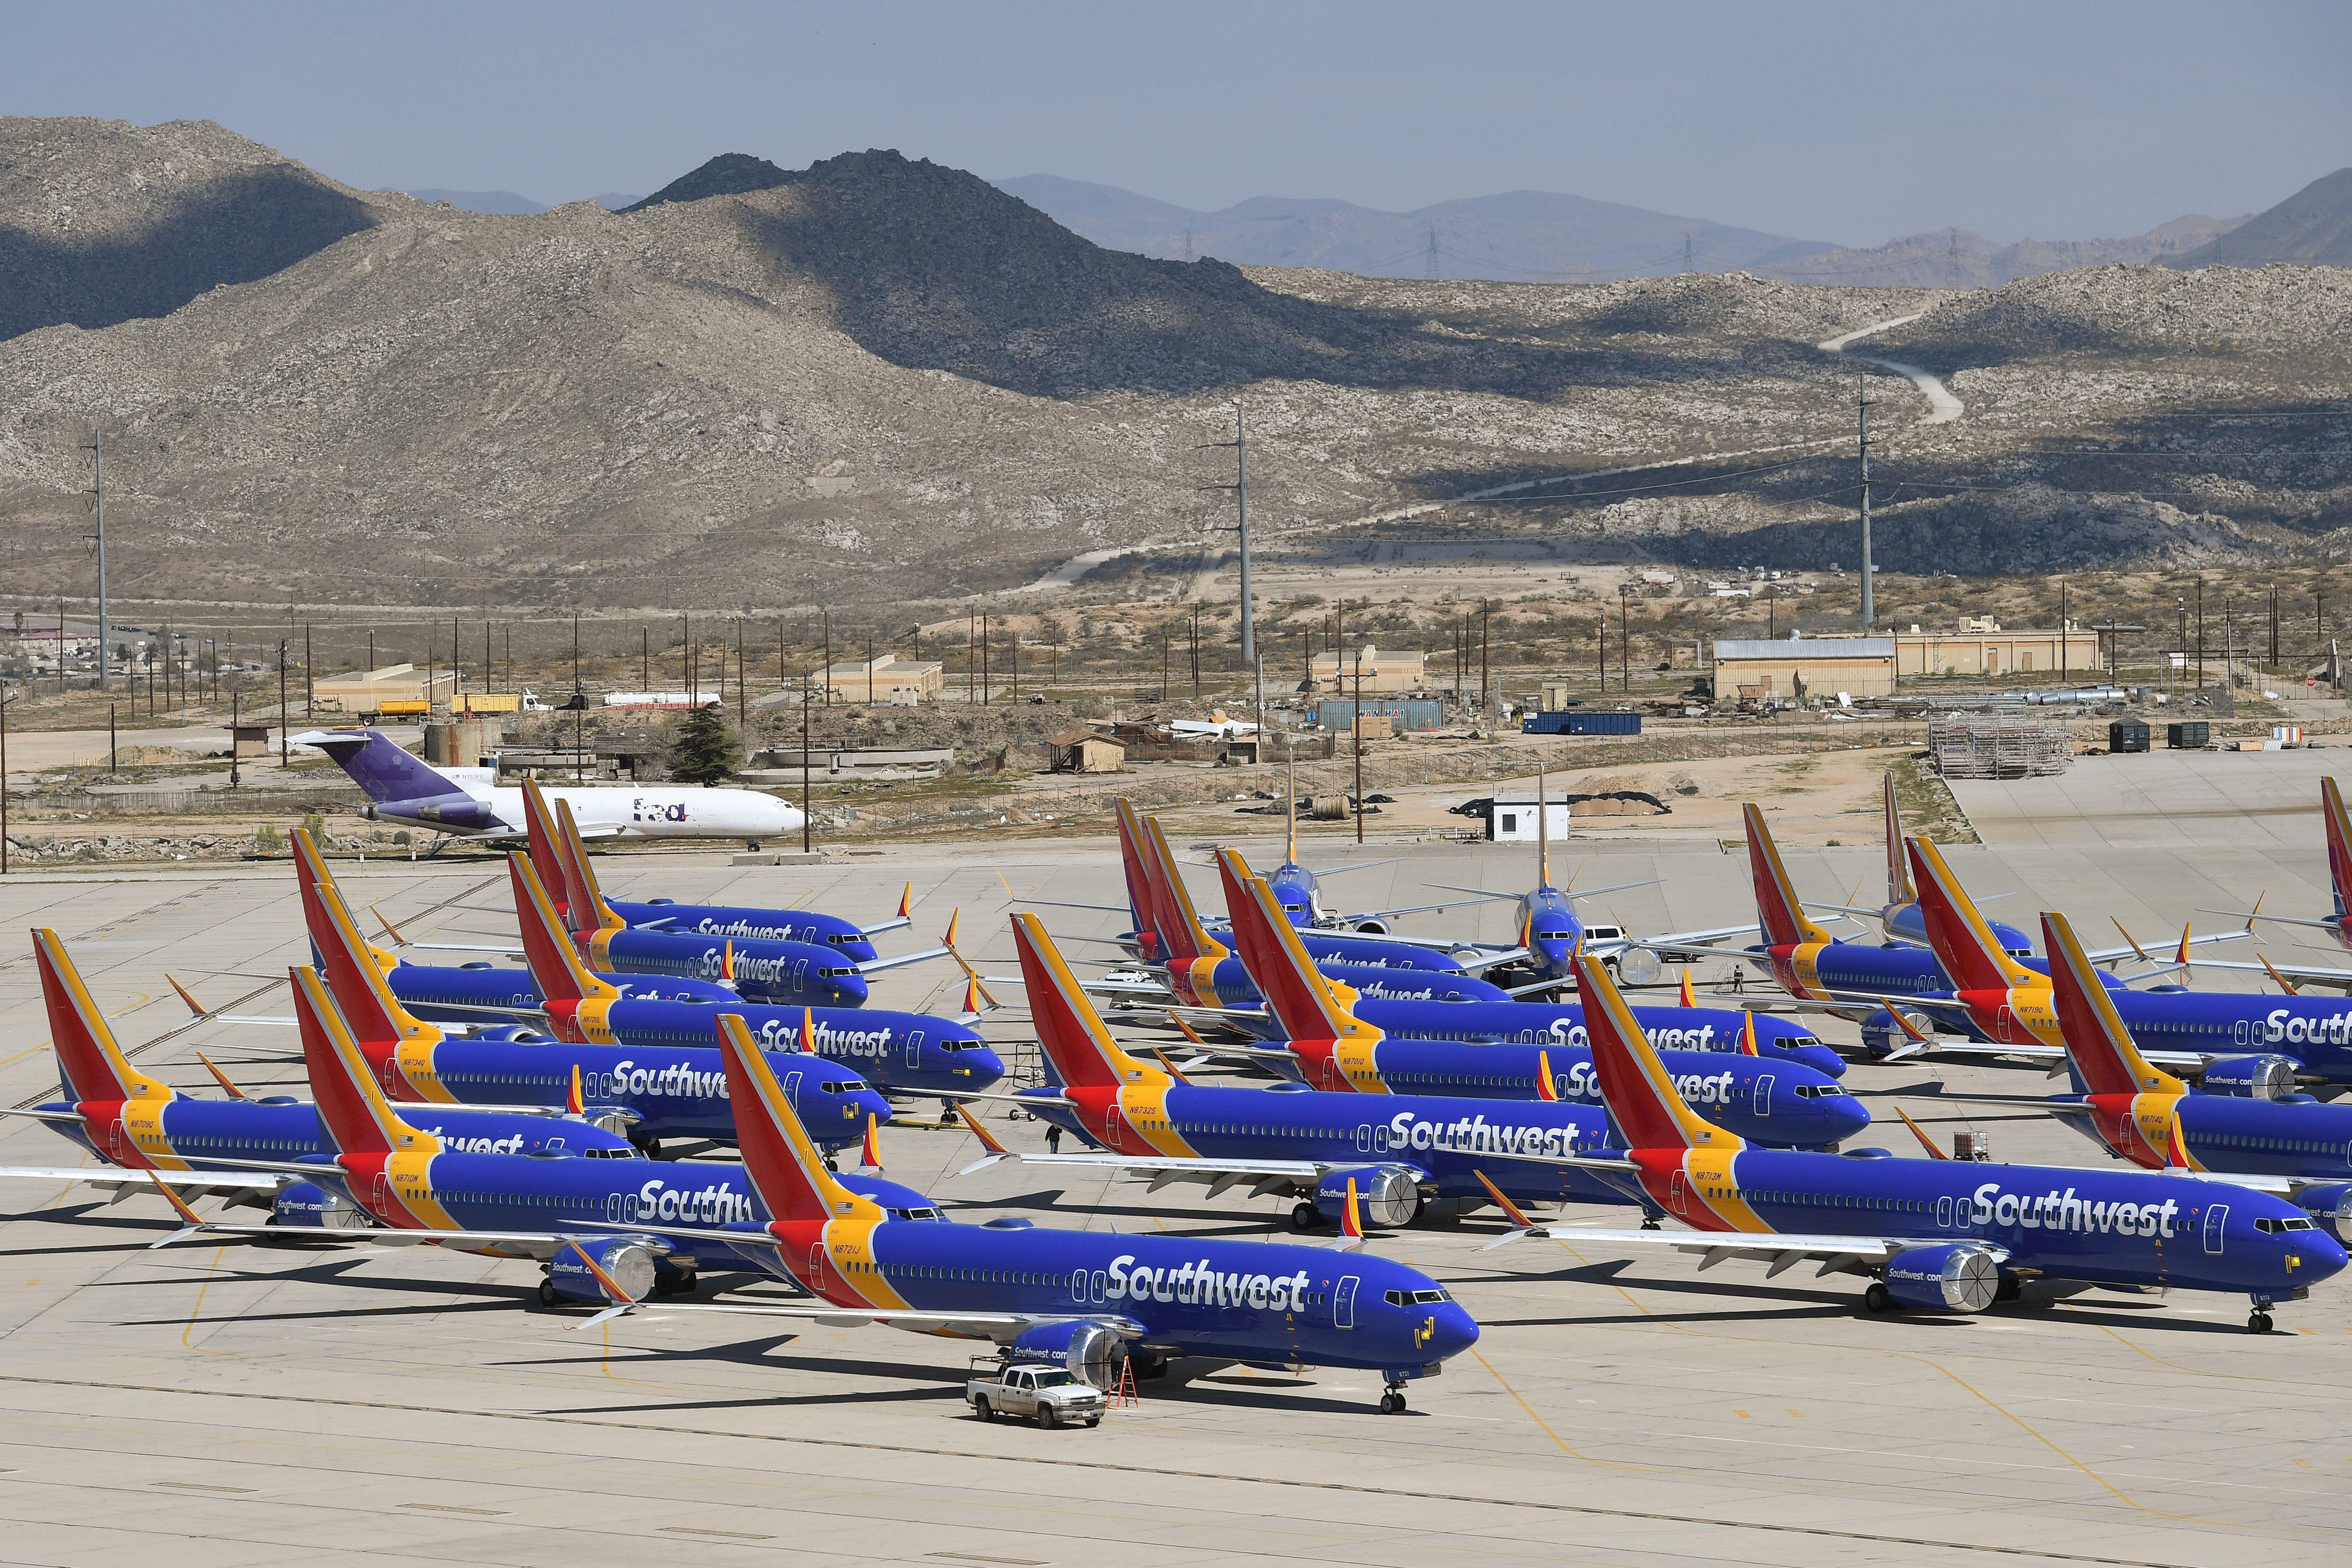 A number of Southwest Airlines Boeing 737 MAX aircraft are parked on the tarmac.